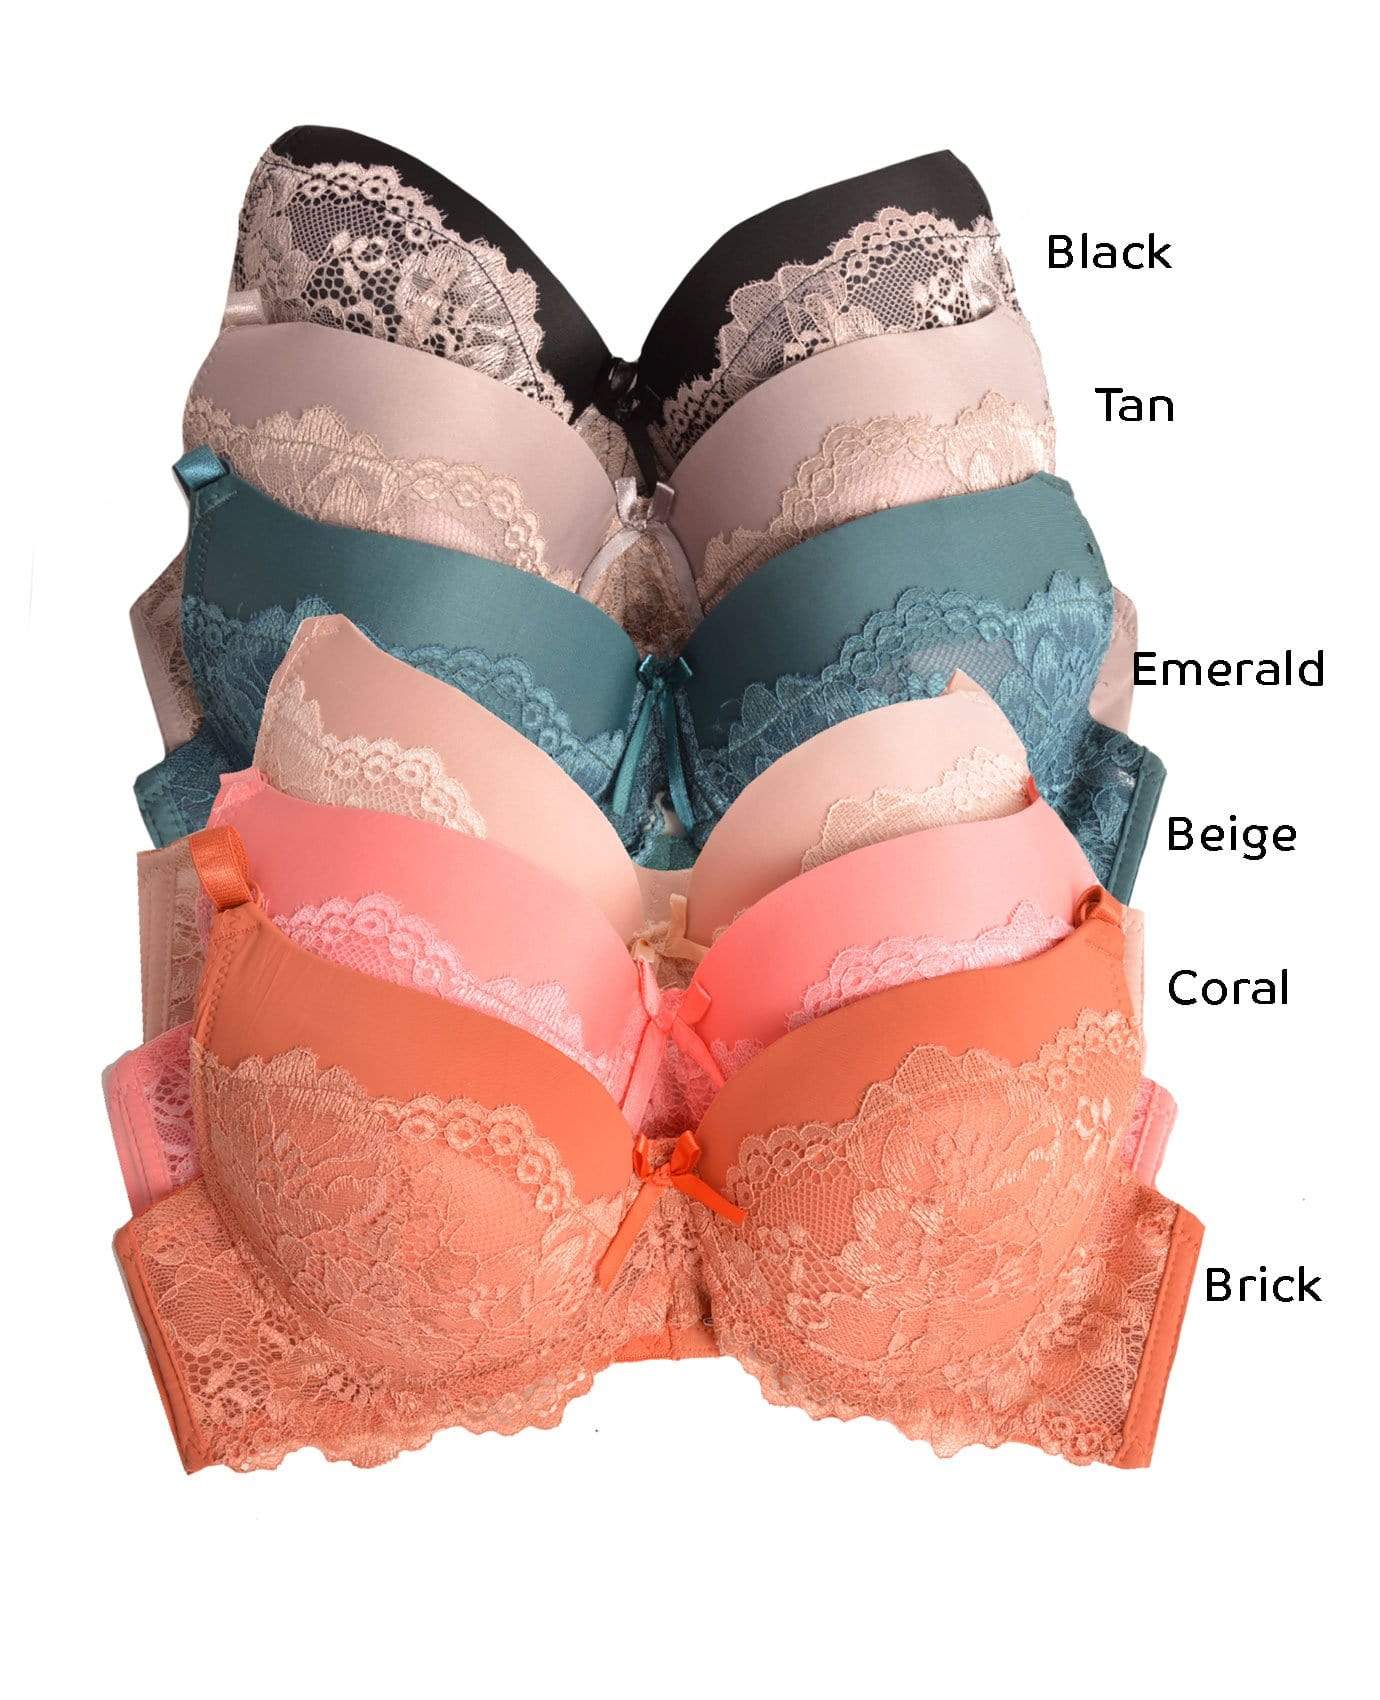 Sofra BR4299PL - 36B Womens Solid Lace Accent Bra Style Intimate Sets, Size  36B - Pack of 6